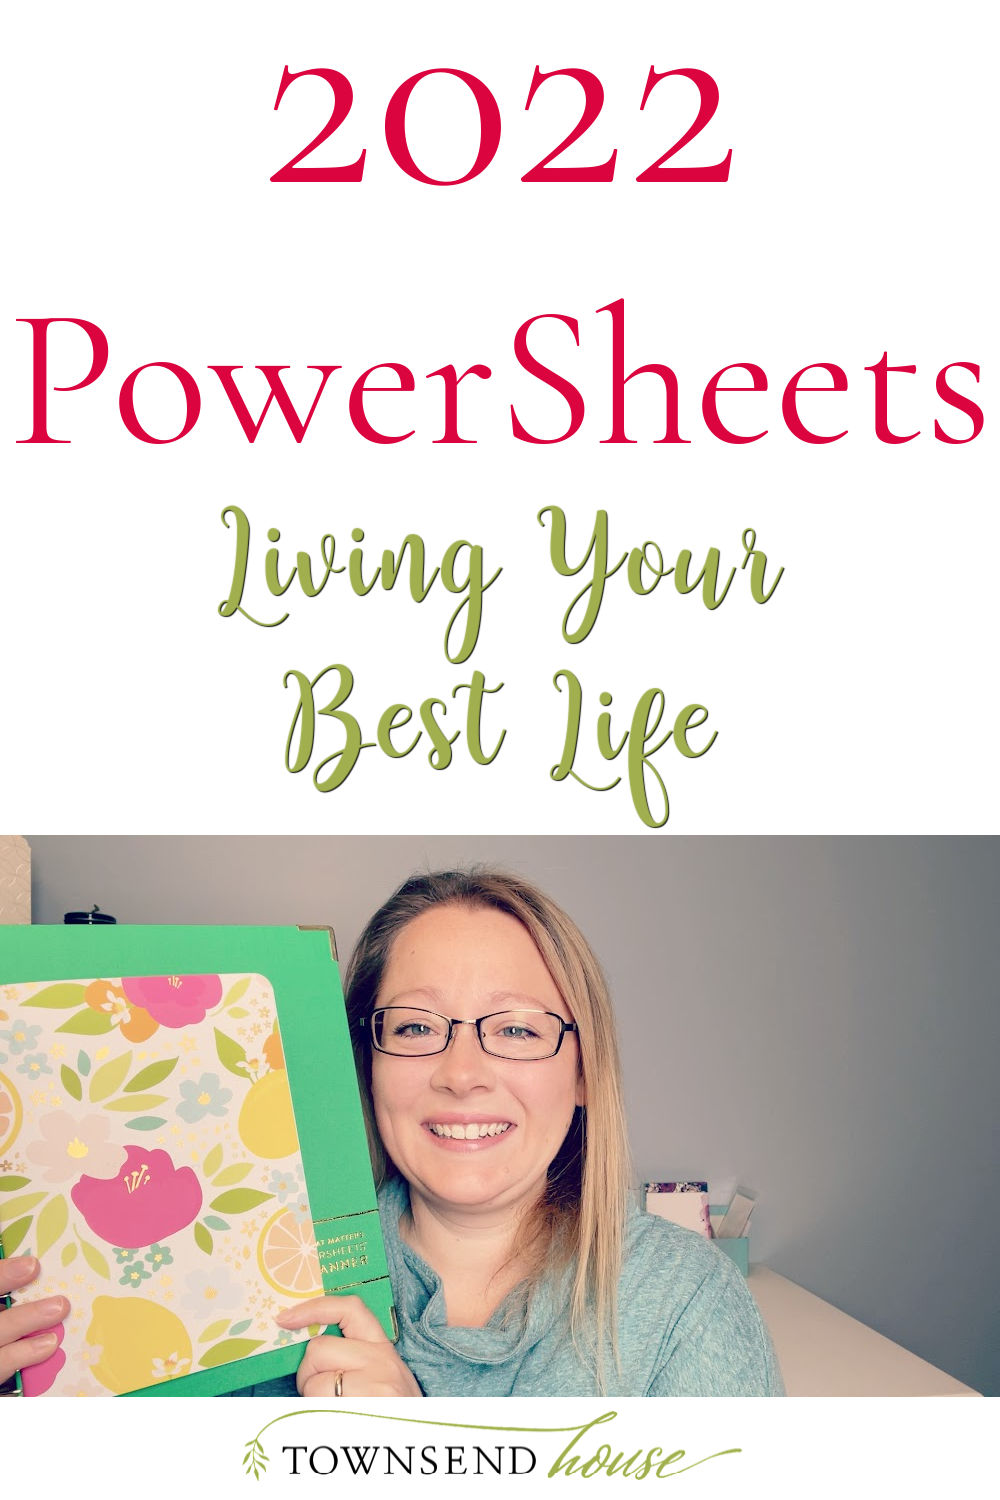 2022 PowerSheets: Goals and Living your Best Life